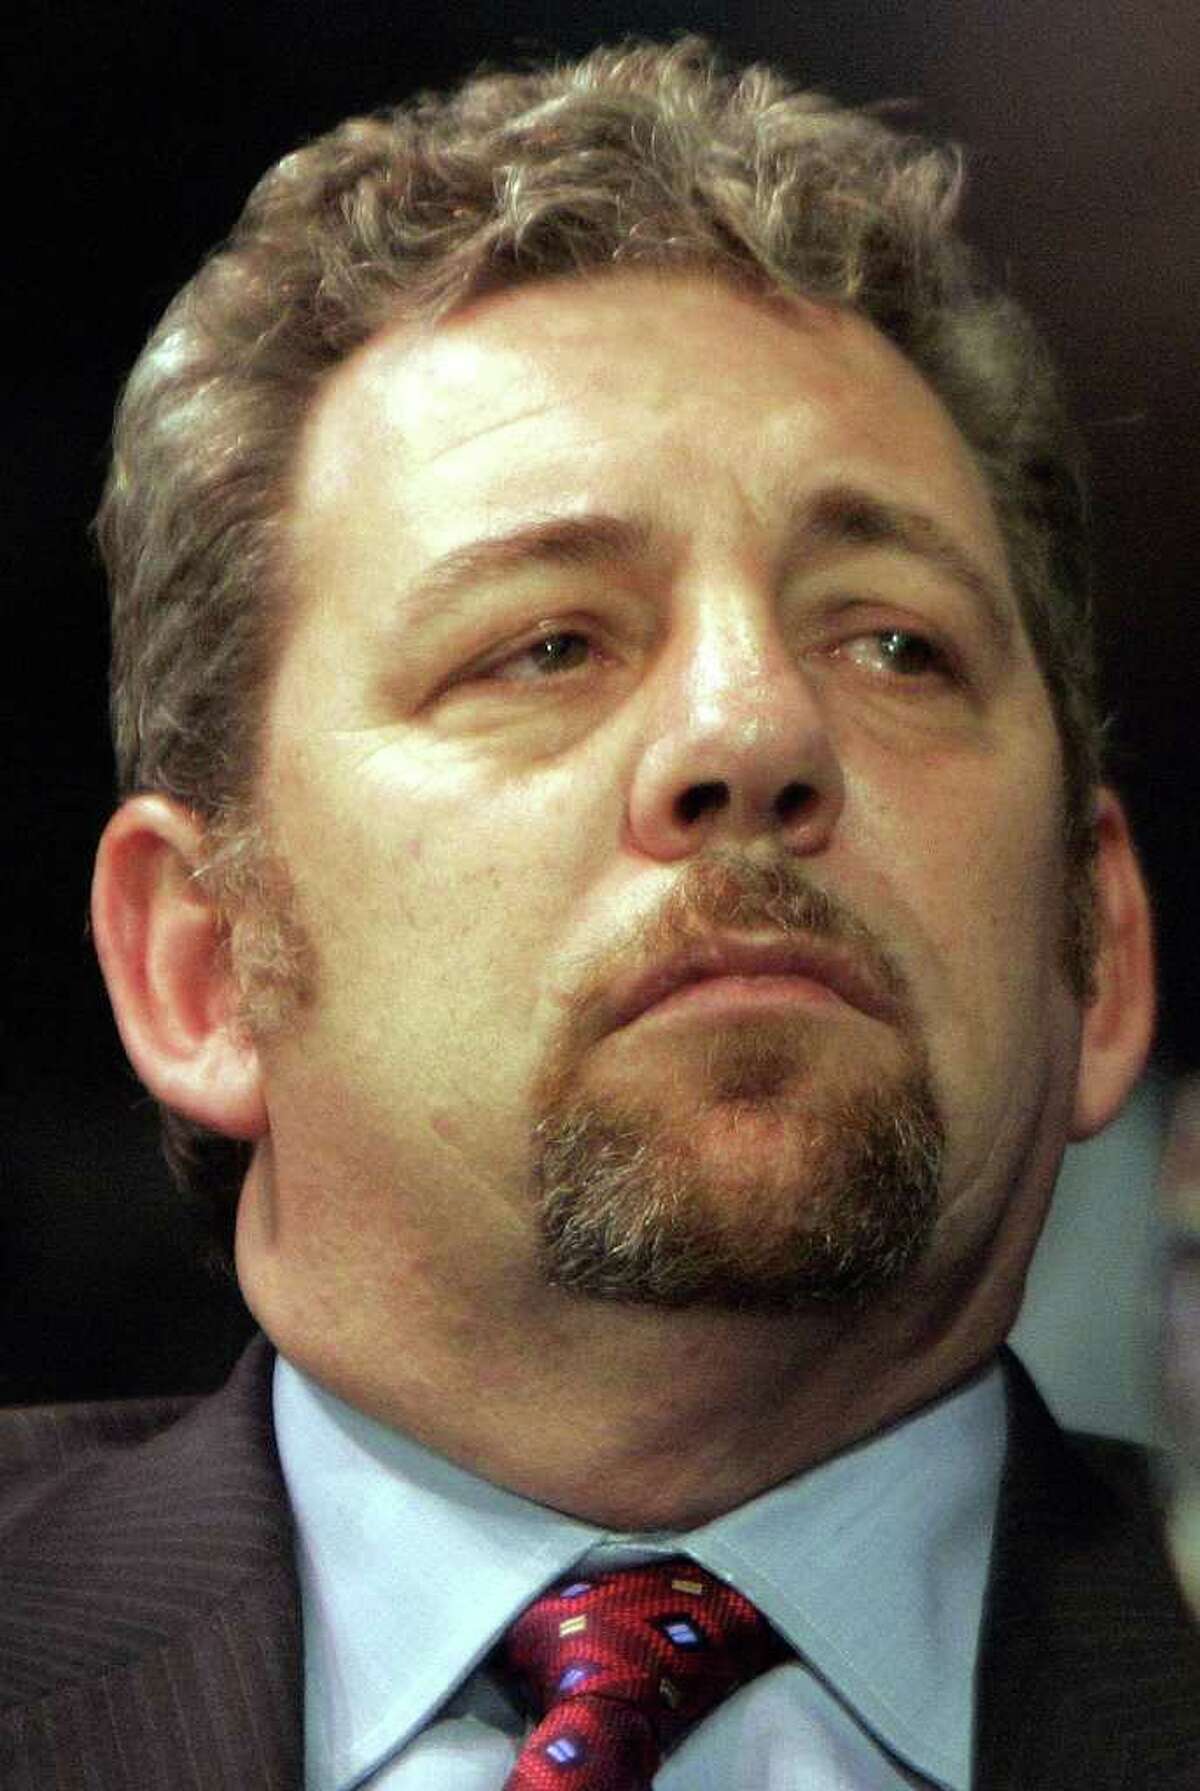 FILE - In this Jan. 11, 2006 file photo, James Dolan, Cablevision President and Chief Executive Officer and Madison Square Garden Chairman, attends a news conference in New York. With a midnight deadline looming on a threat to pull the plug on Cablevision's 3.1 million customers in New York a day before the Academy Awards, there was still no word Saturday night on whether ABC's parent company and the cable operator have reached a decision. (AP Photo/Kathy Willens, File)